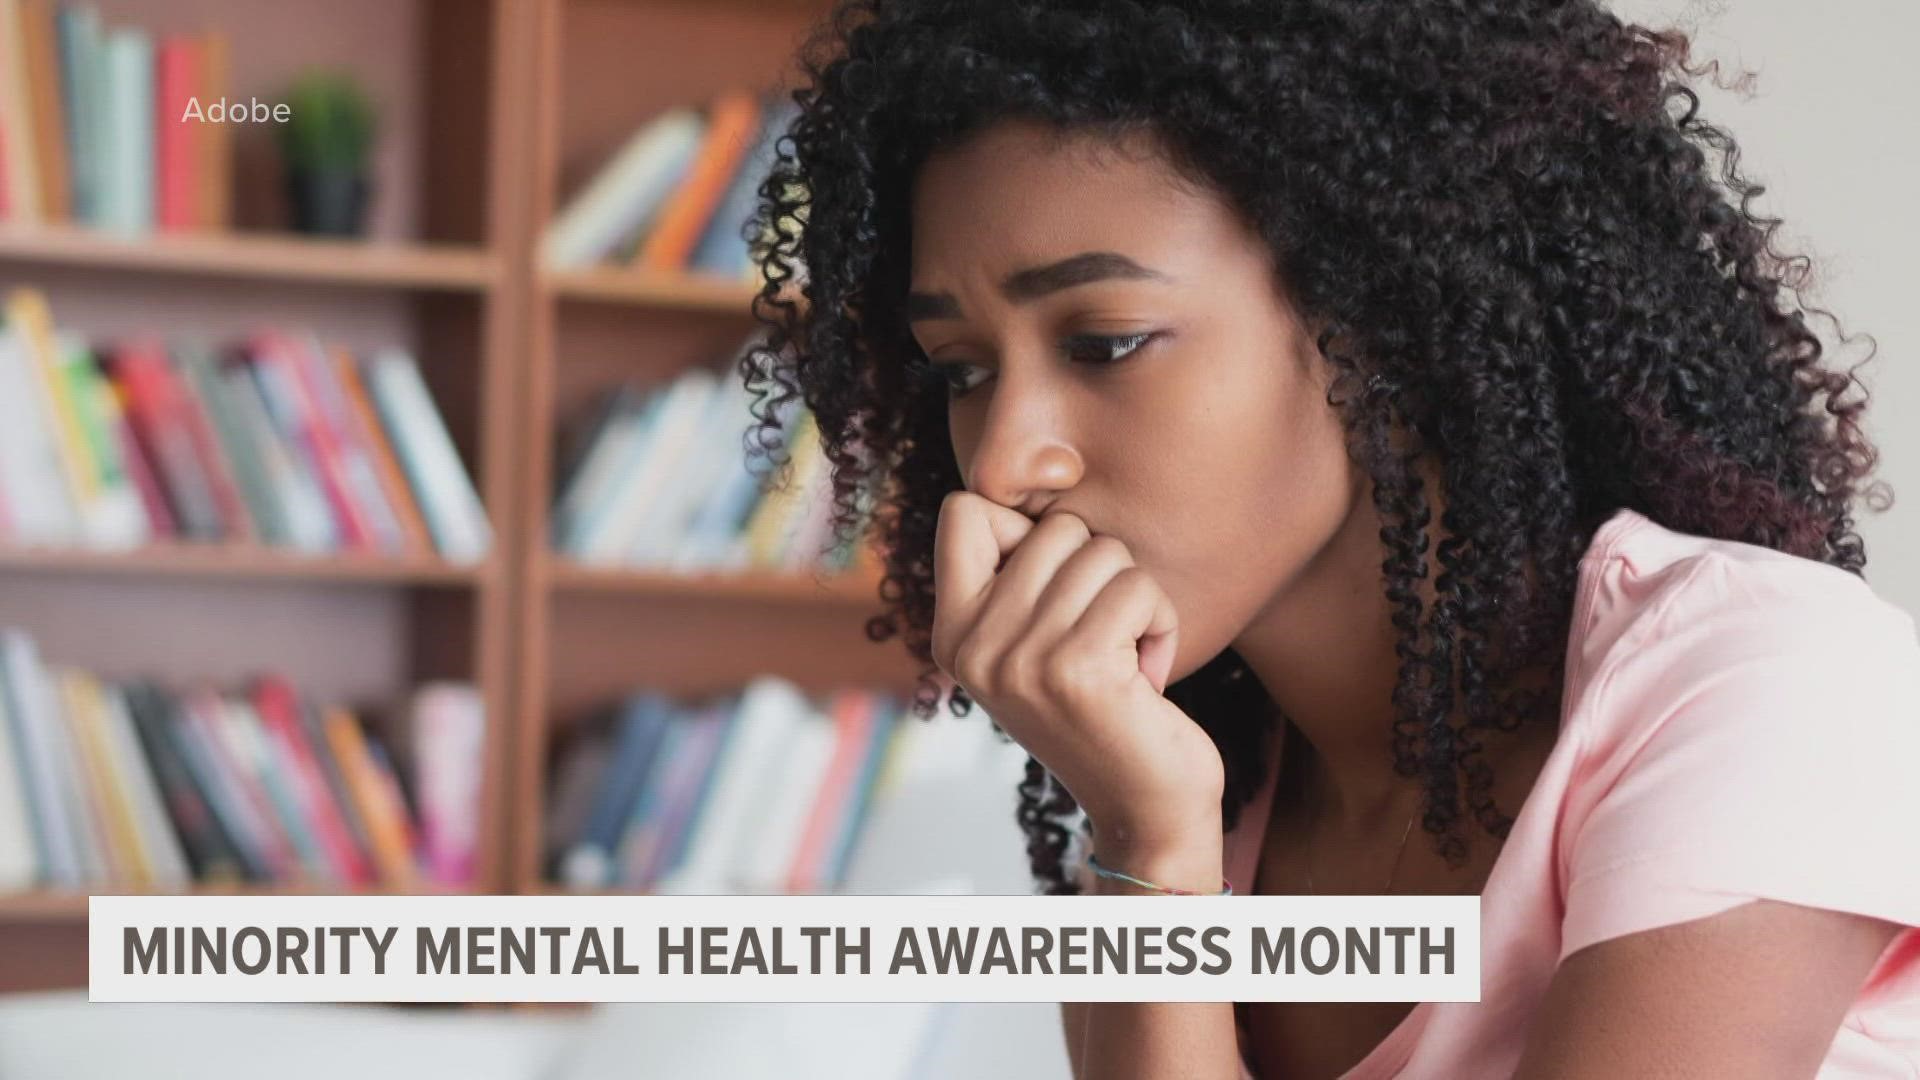 July is National Minority Mental Health Awareness Month. It shines a light on the unique struggles that minority communities face regarding mental health.